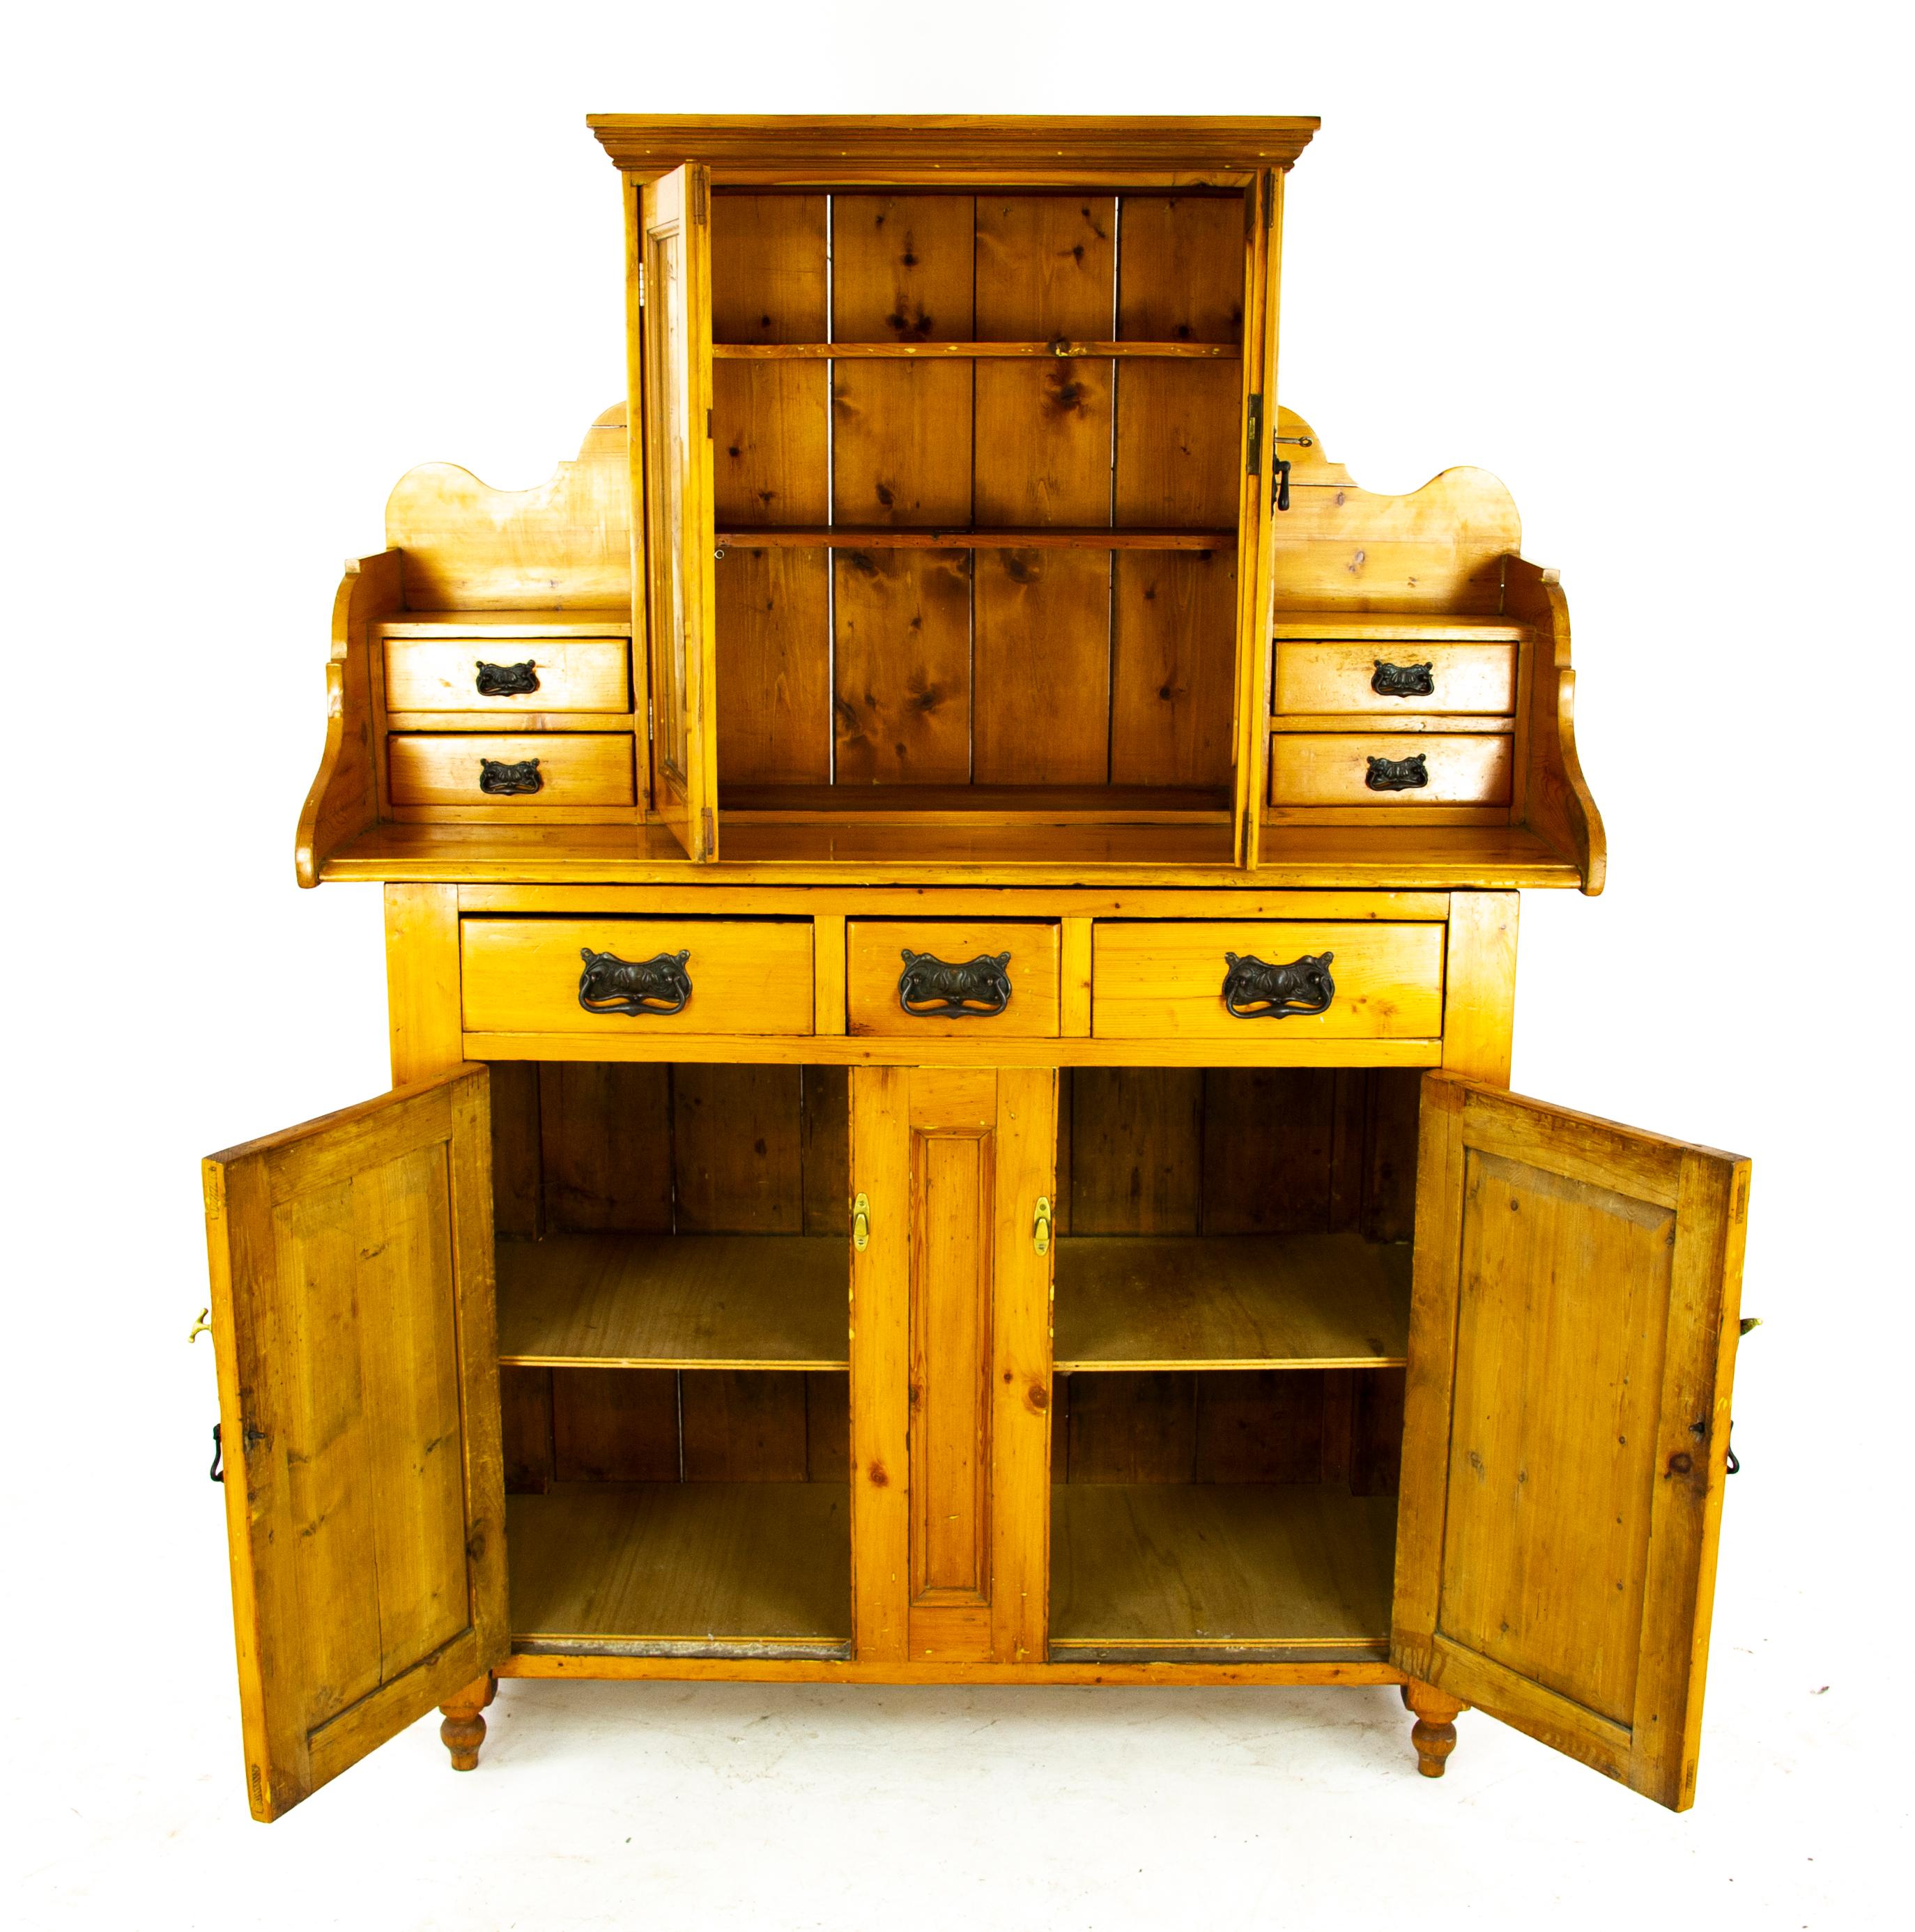 Antique pine farmhouse kitchen dresser, antique pine sideboard, Farmhouse sideboard, kitchen dresser, Antique Furniture, Scotland 1880, B1459

Scotland, 1880
Solid pine construction
Pair of original glass doors with two fixed shelves to the